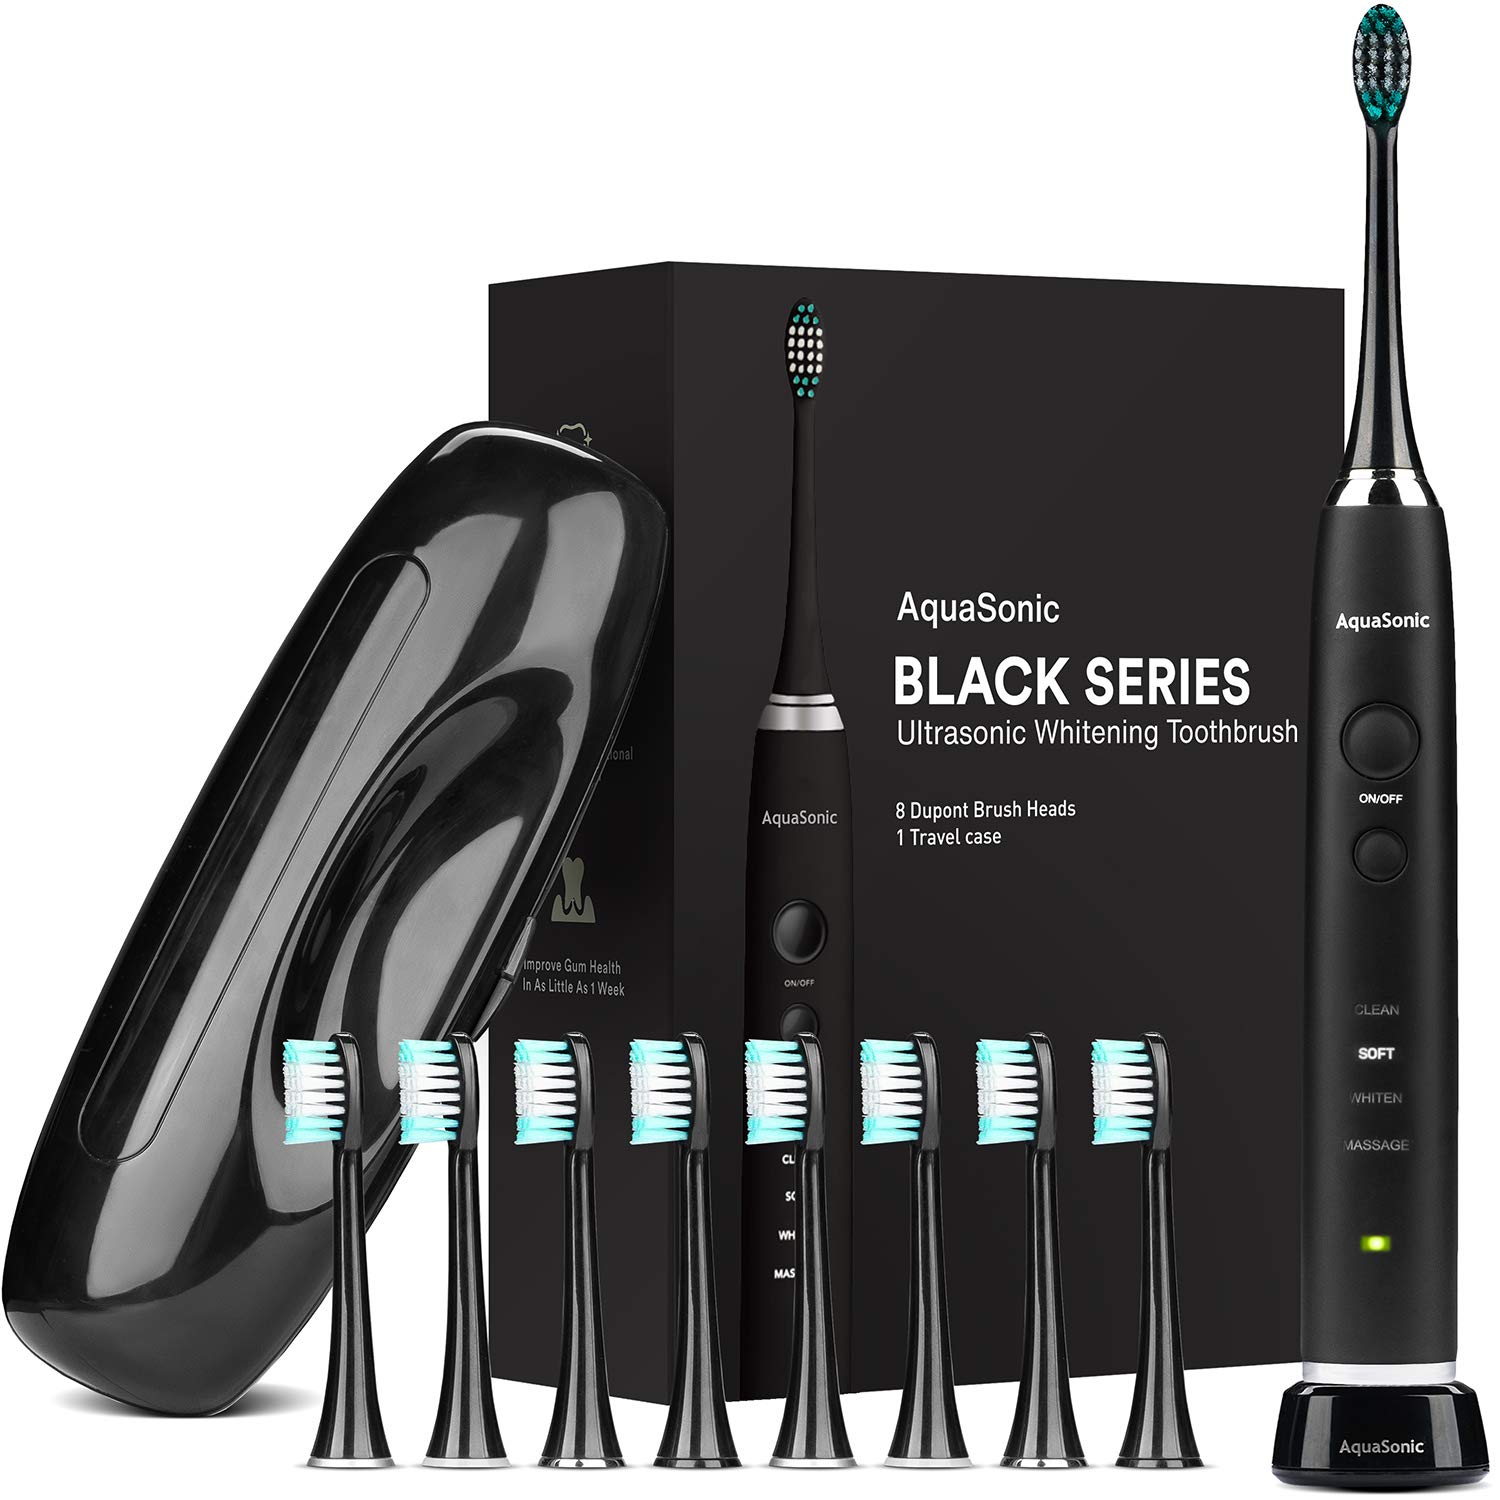 AquaSonic Black Series Ultra Whitening Toothbrush - 8 DuPont Brush Heads & Travel Case Included - Ultra Sonic 40,000 VPM Motor & Wireless Charging - 4 Modes w Smart Timer - Modern Electric Toothbrush by Aquasonic